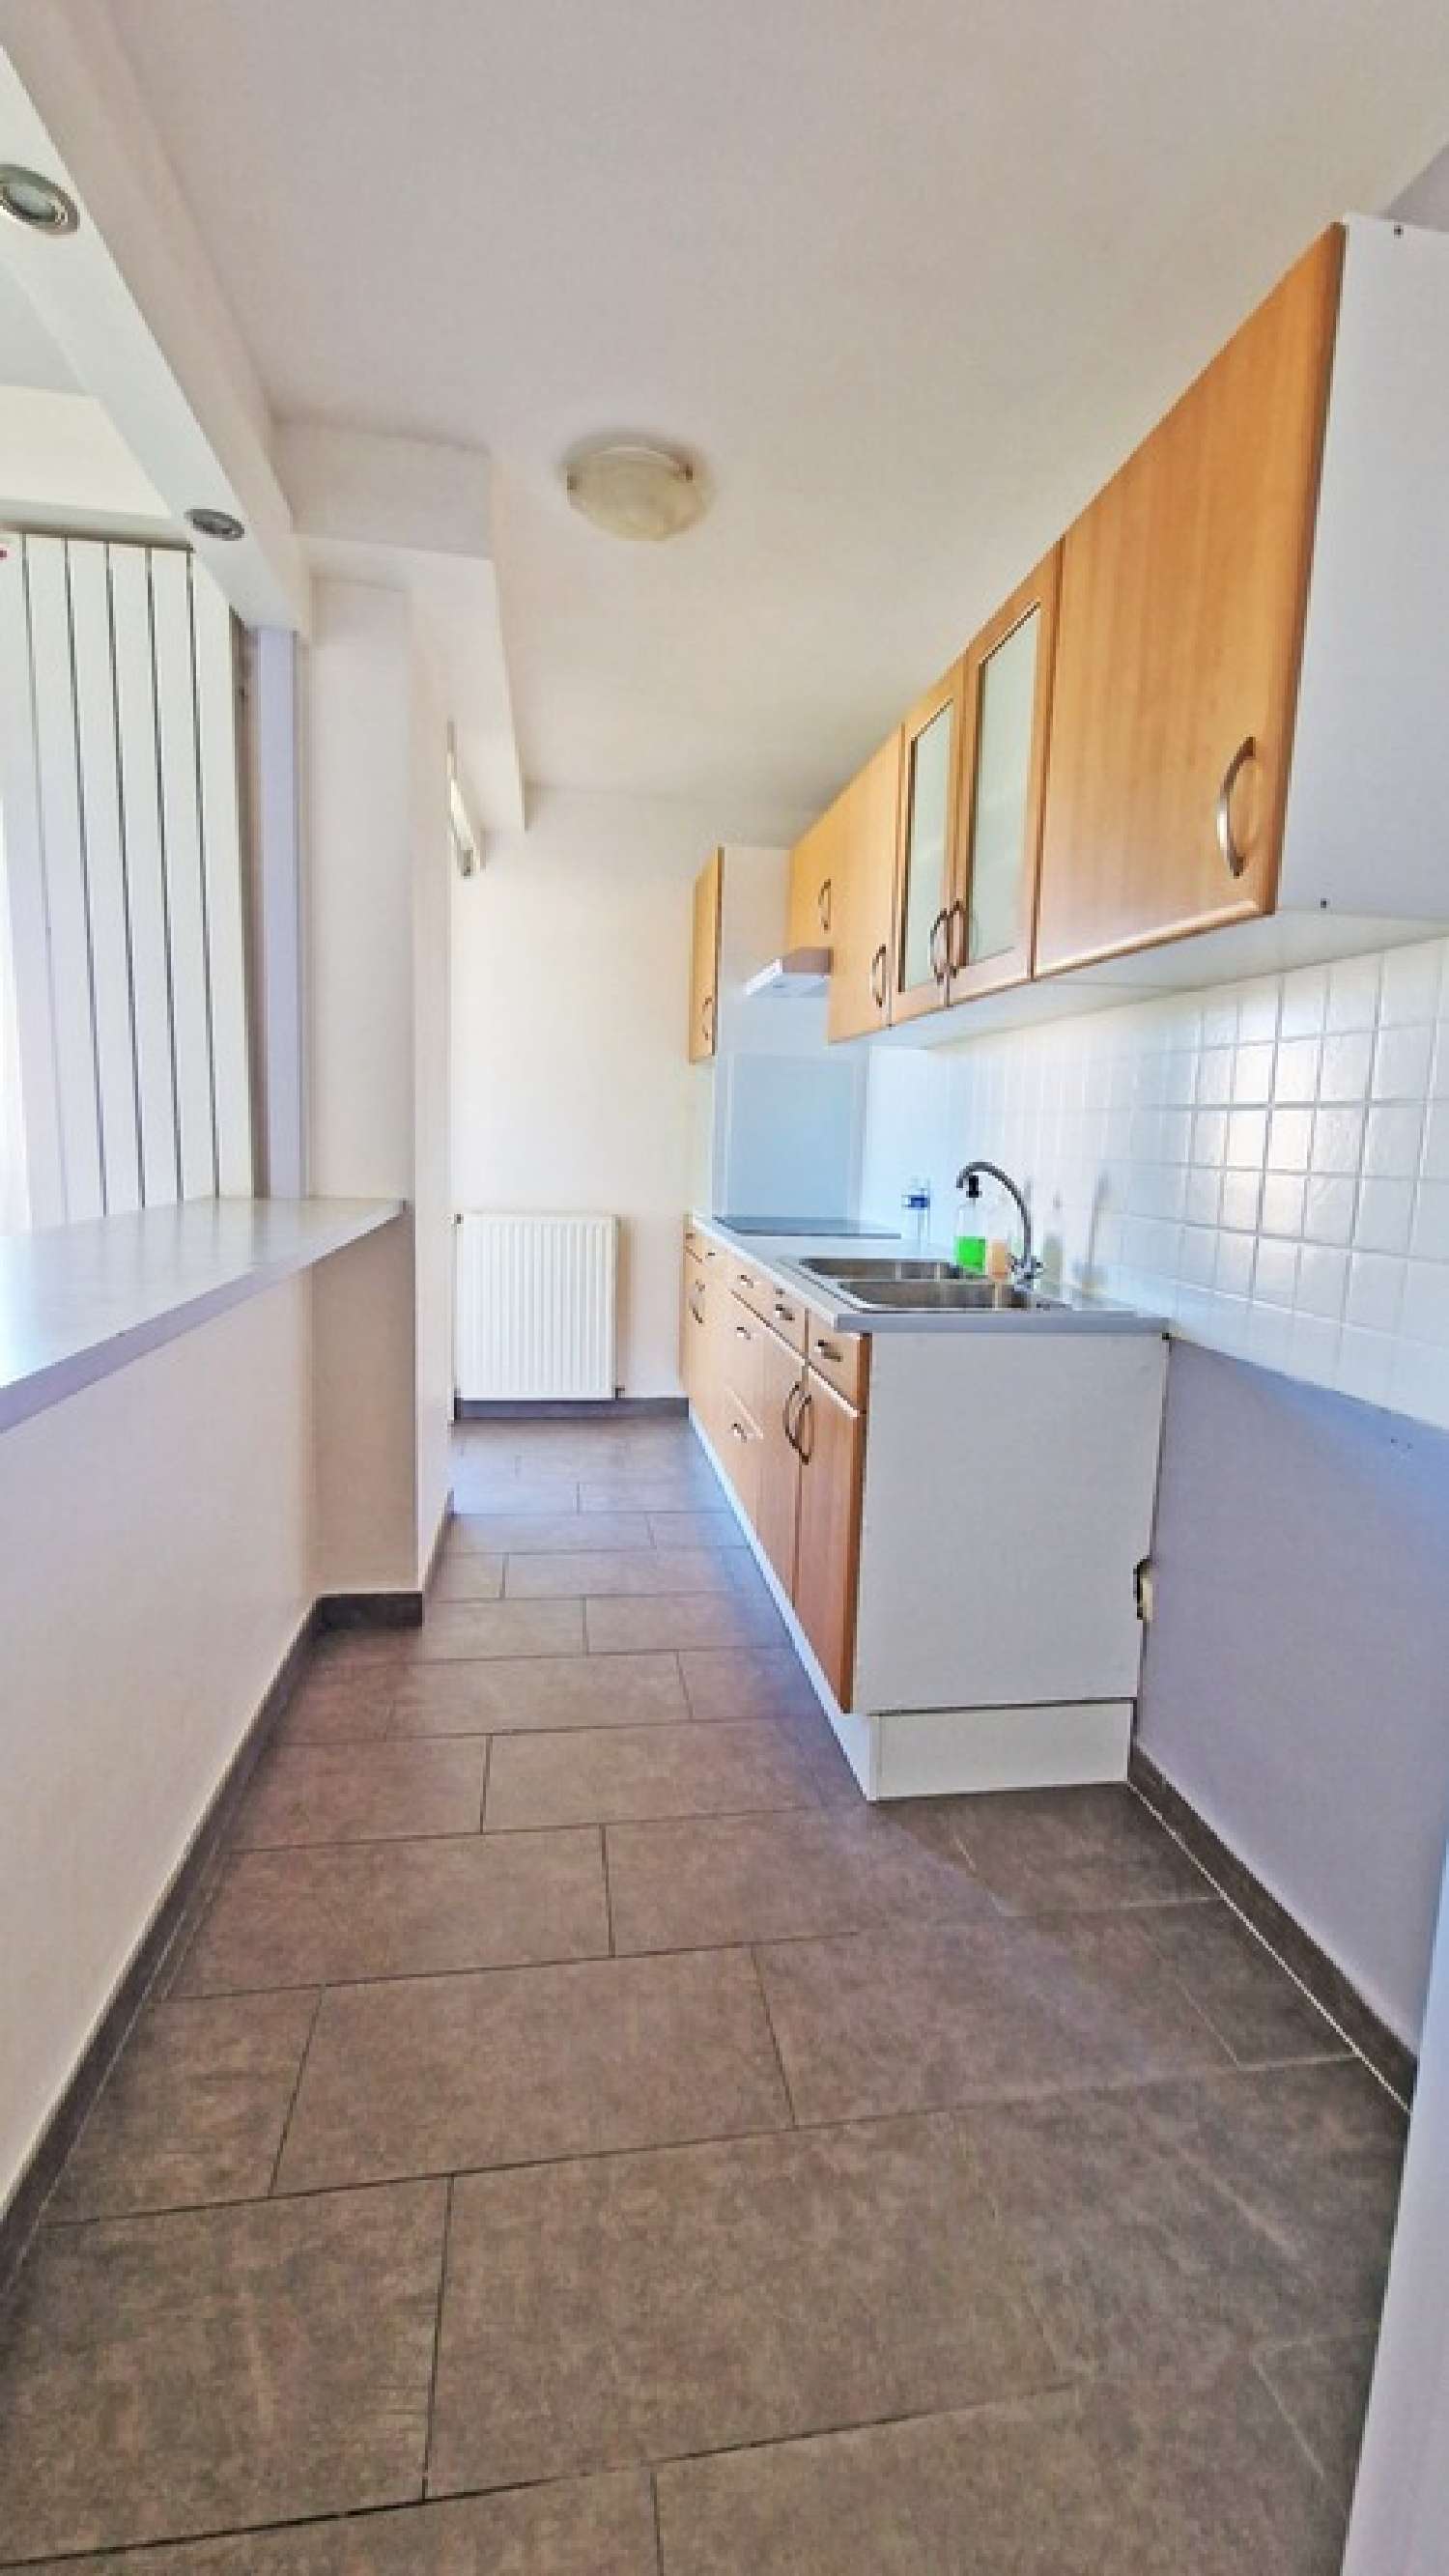  kaufen Wohnung/ Apartment Soisy-sous-Montmorency Val-d'Oise 4